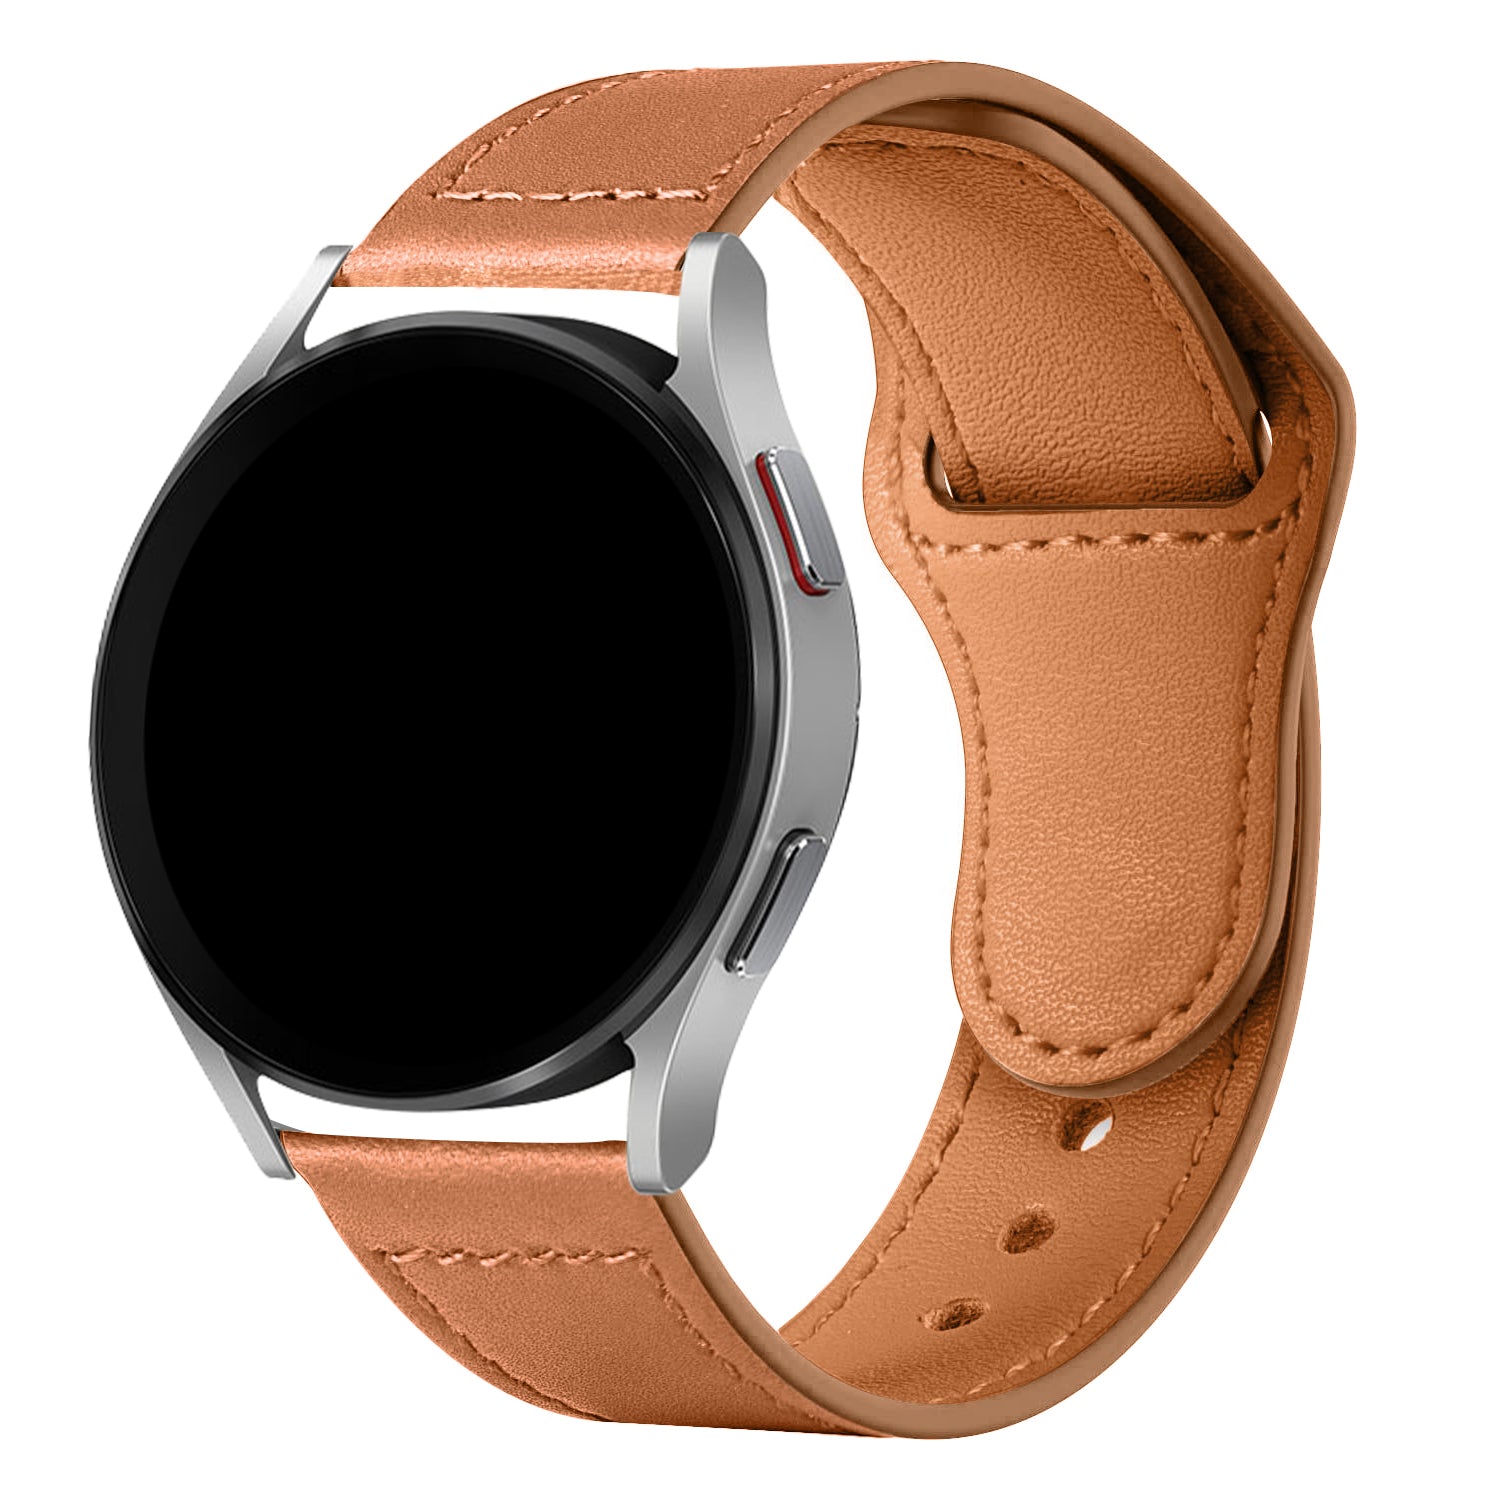 Leather Pin-and-Tuck Strap for Samsung Galaxy Watch - Simply Eccentric